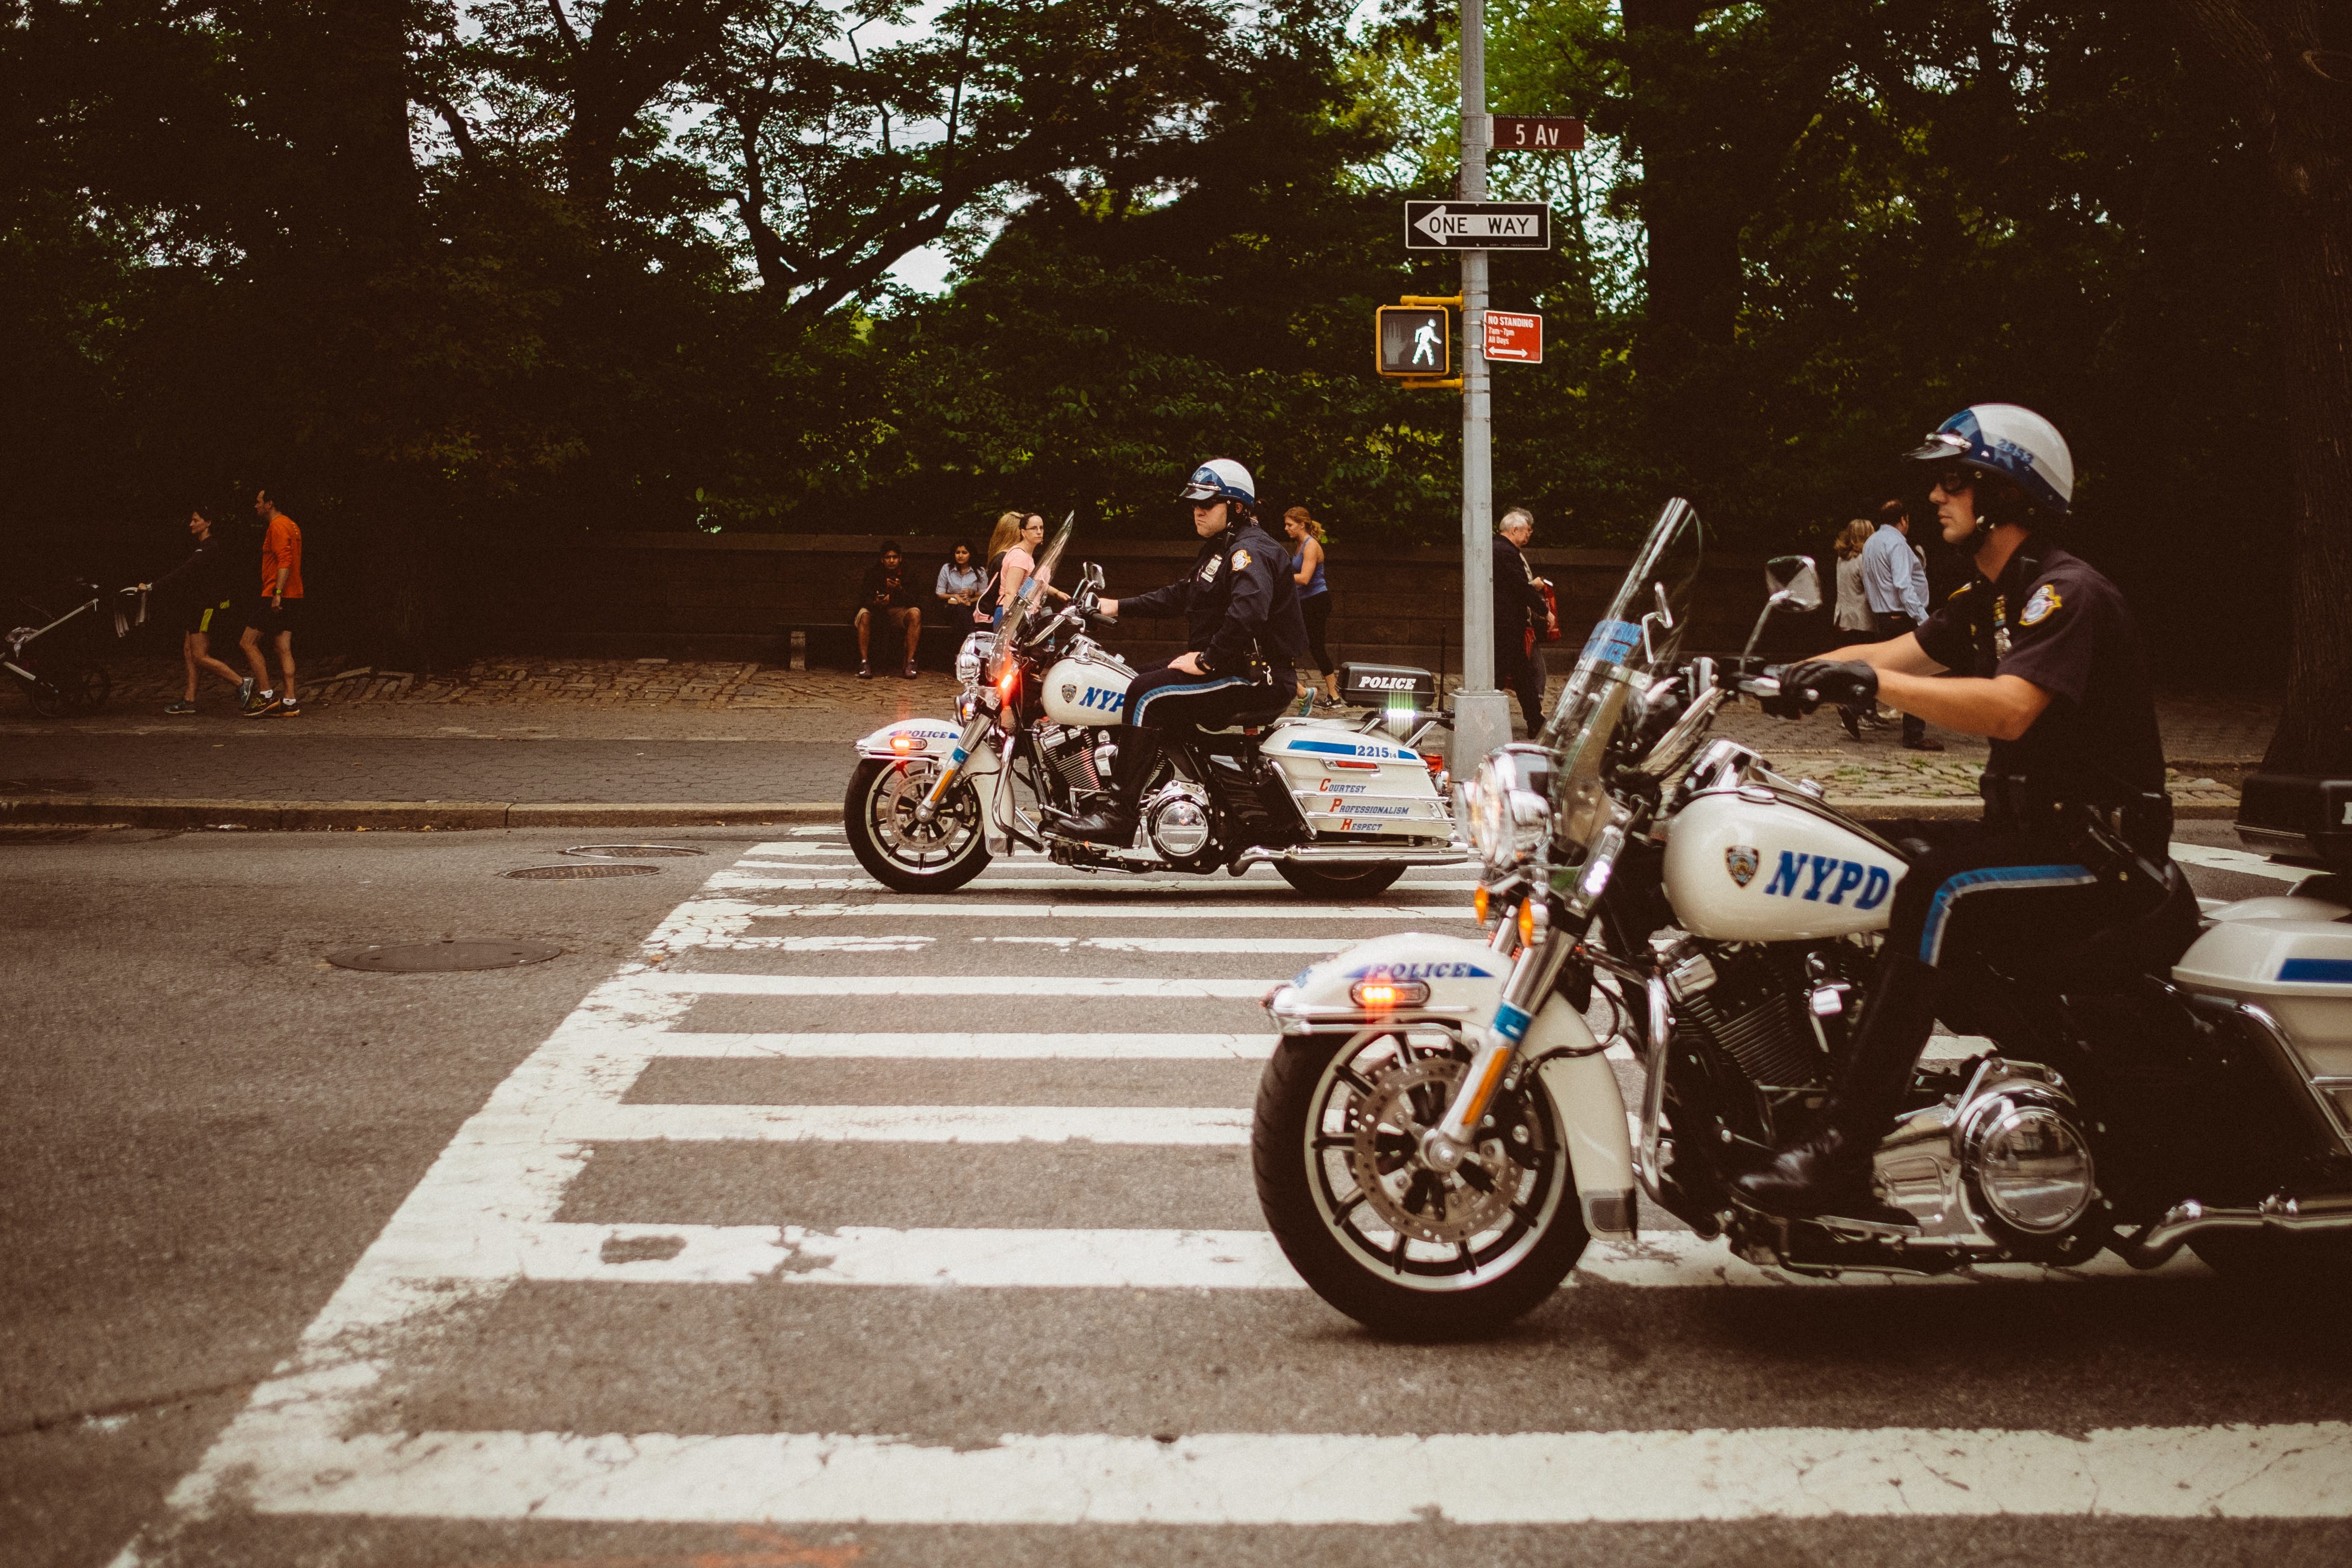 Central Park police officers on motorcycles; image by Tobias Zils, via Unsplash.com.